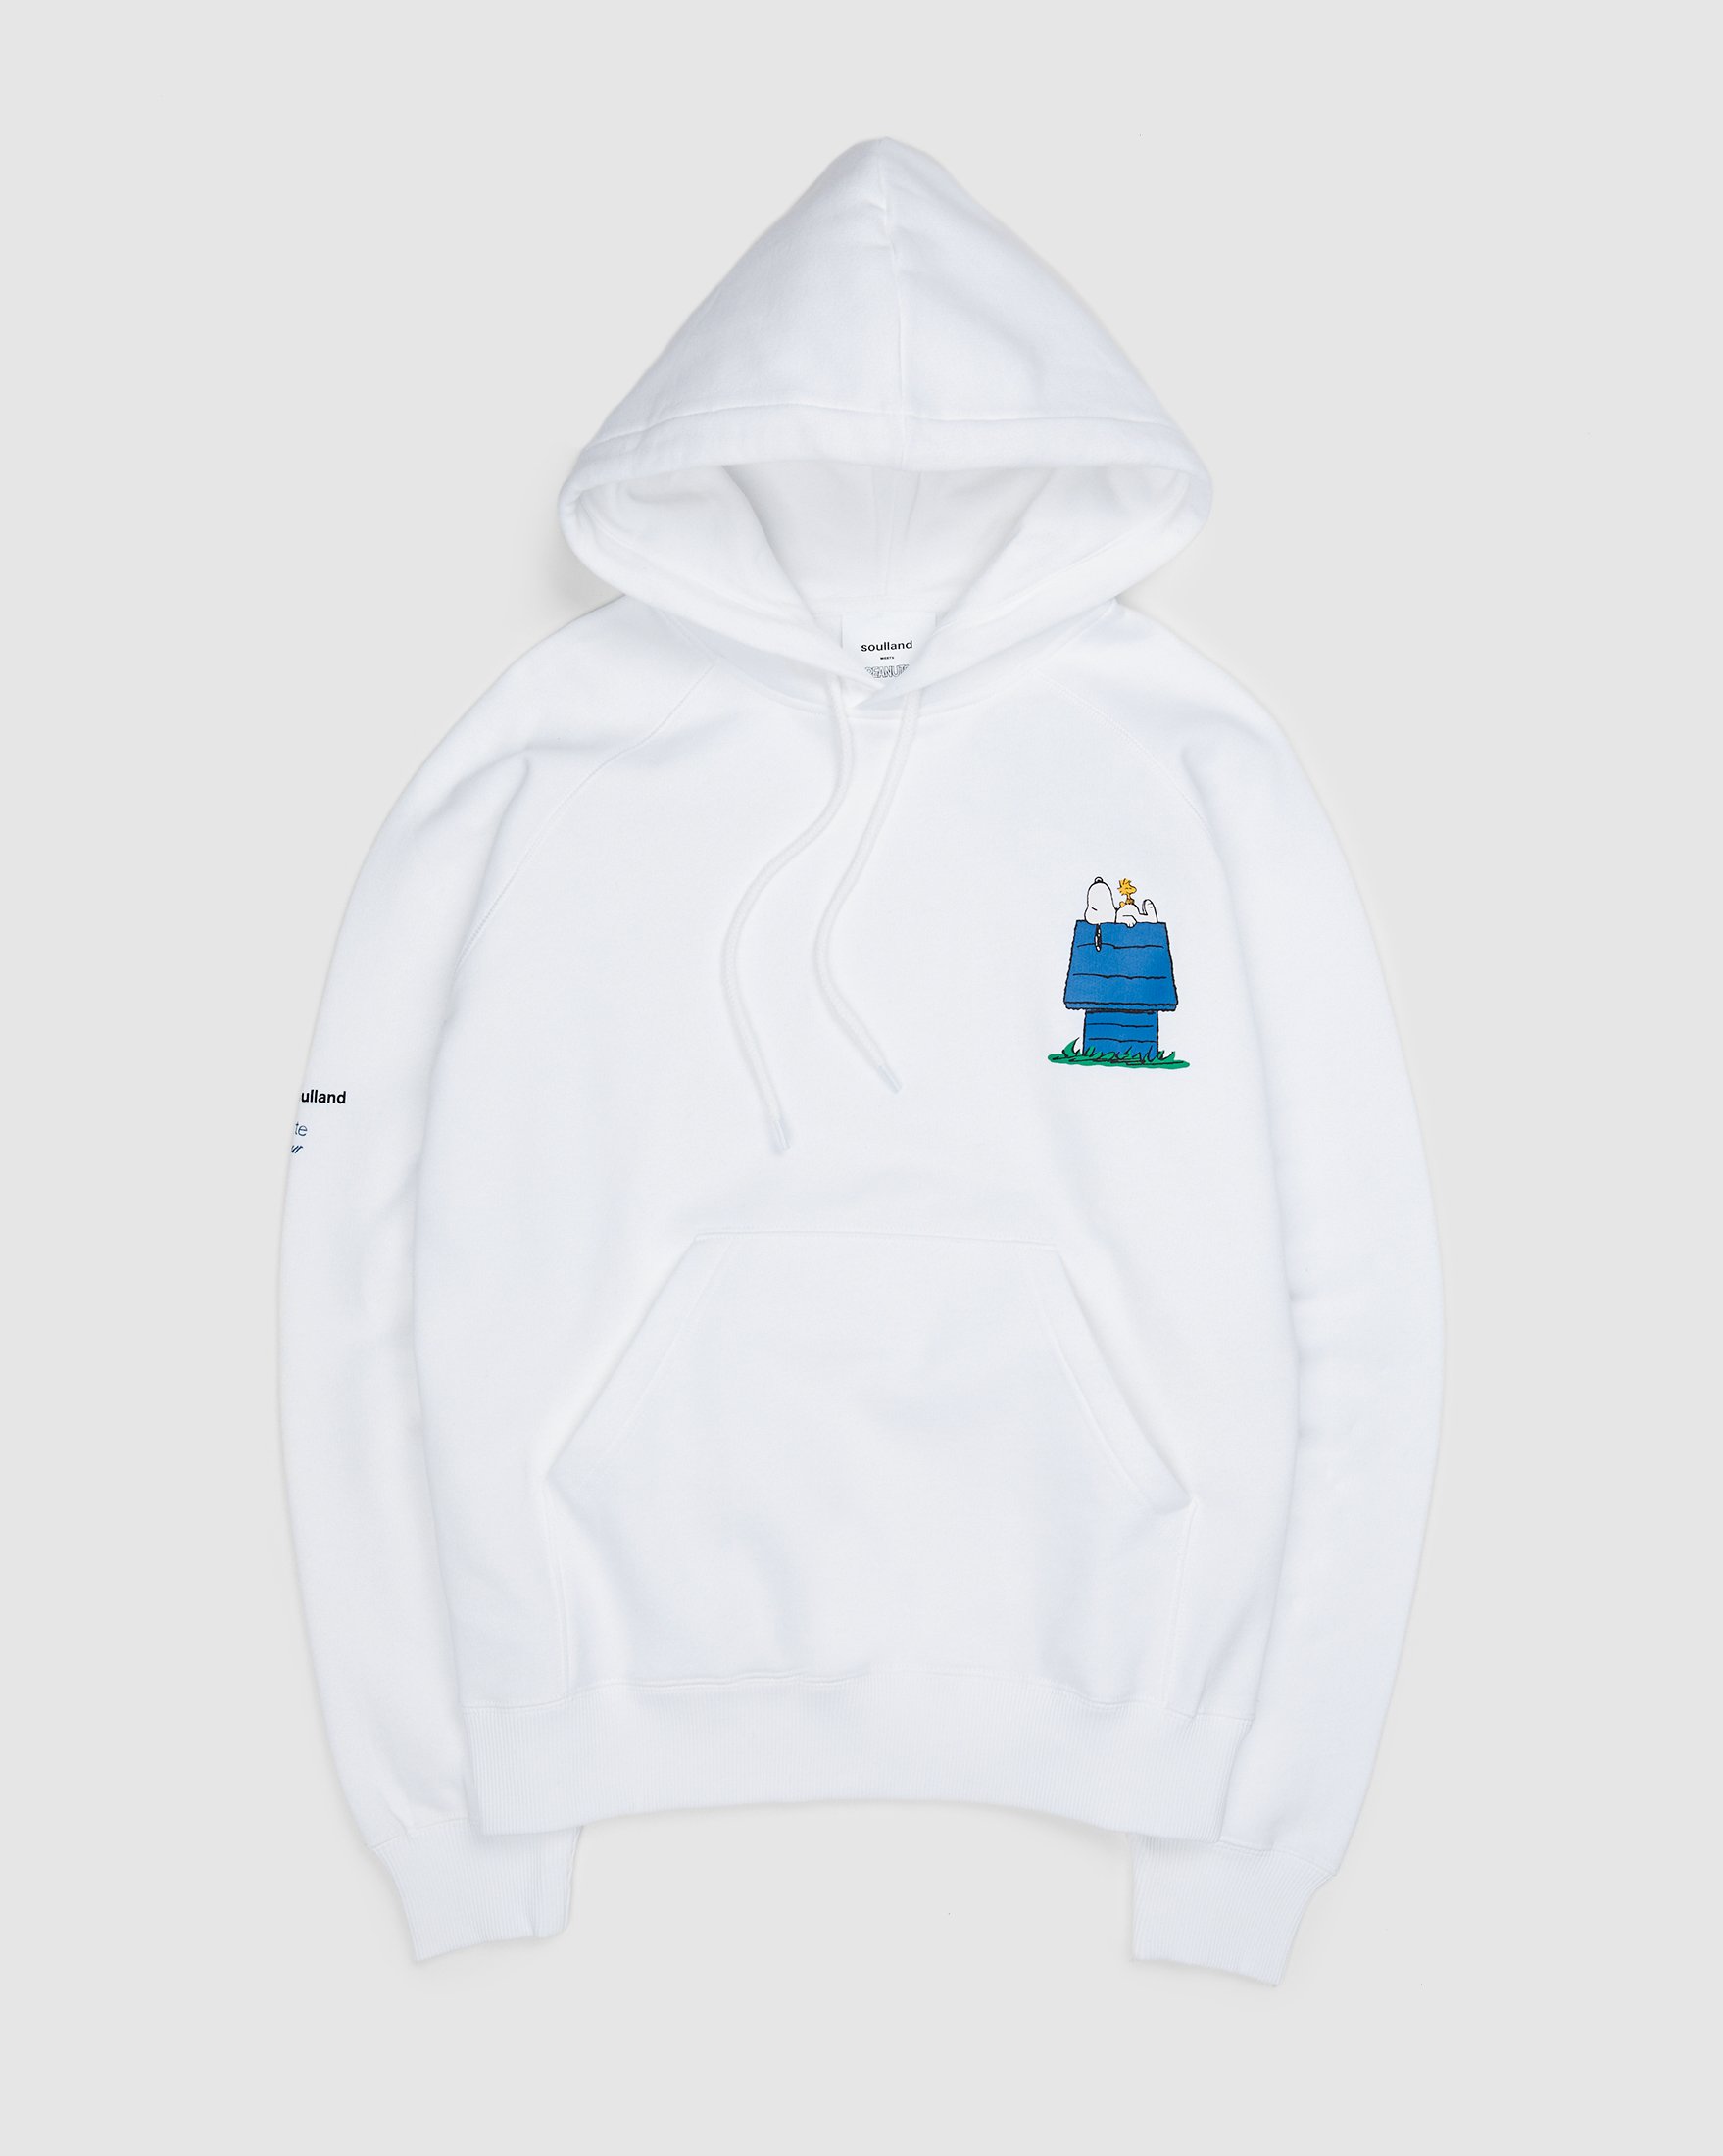 Colette Mon Amour x Soulland - Snoopy Bed White Hoodie - Clothing - White - Image 1